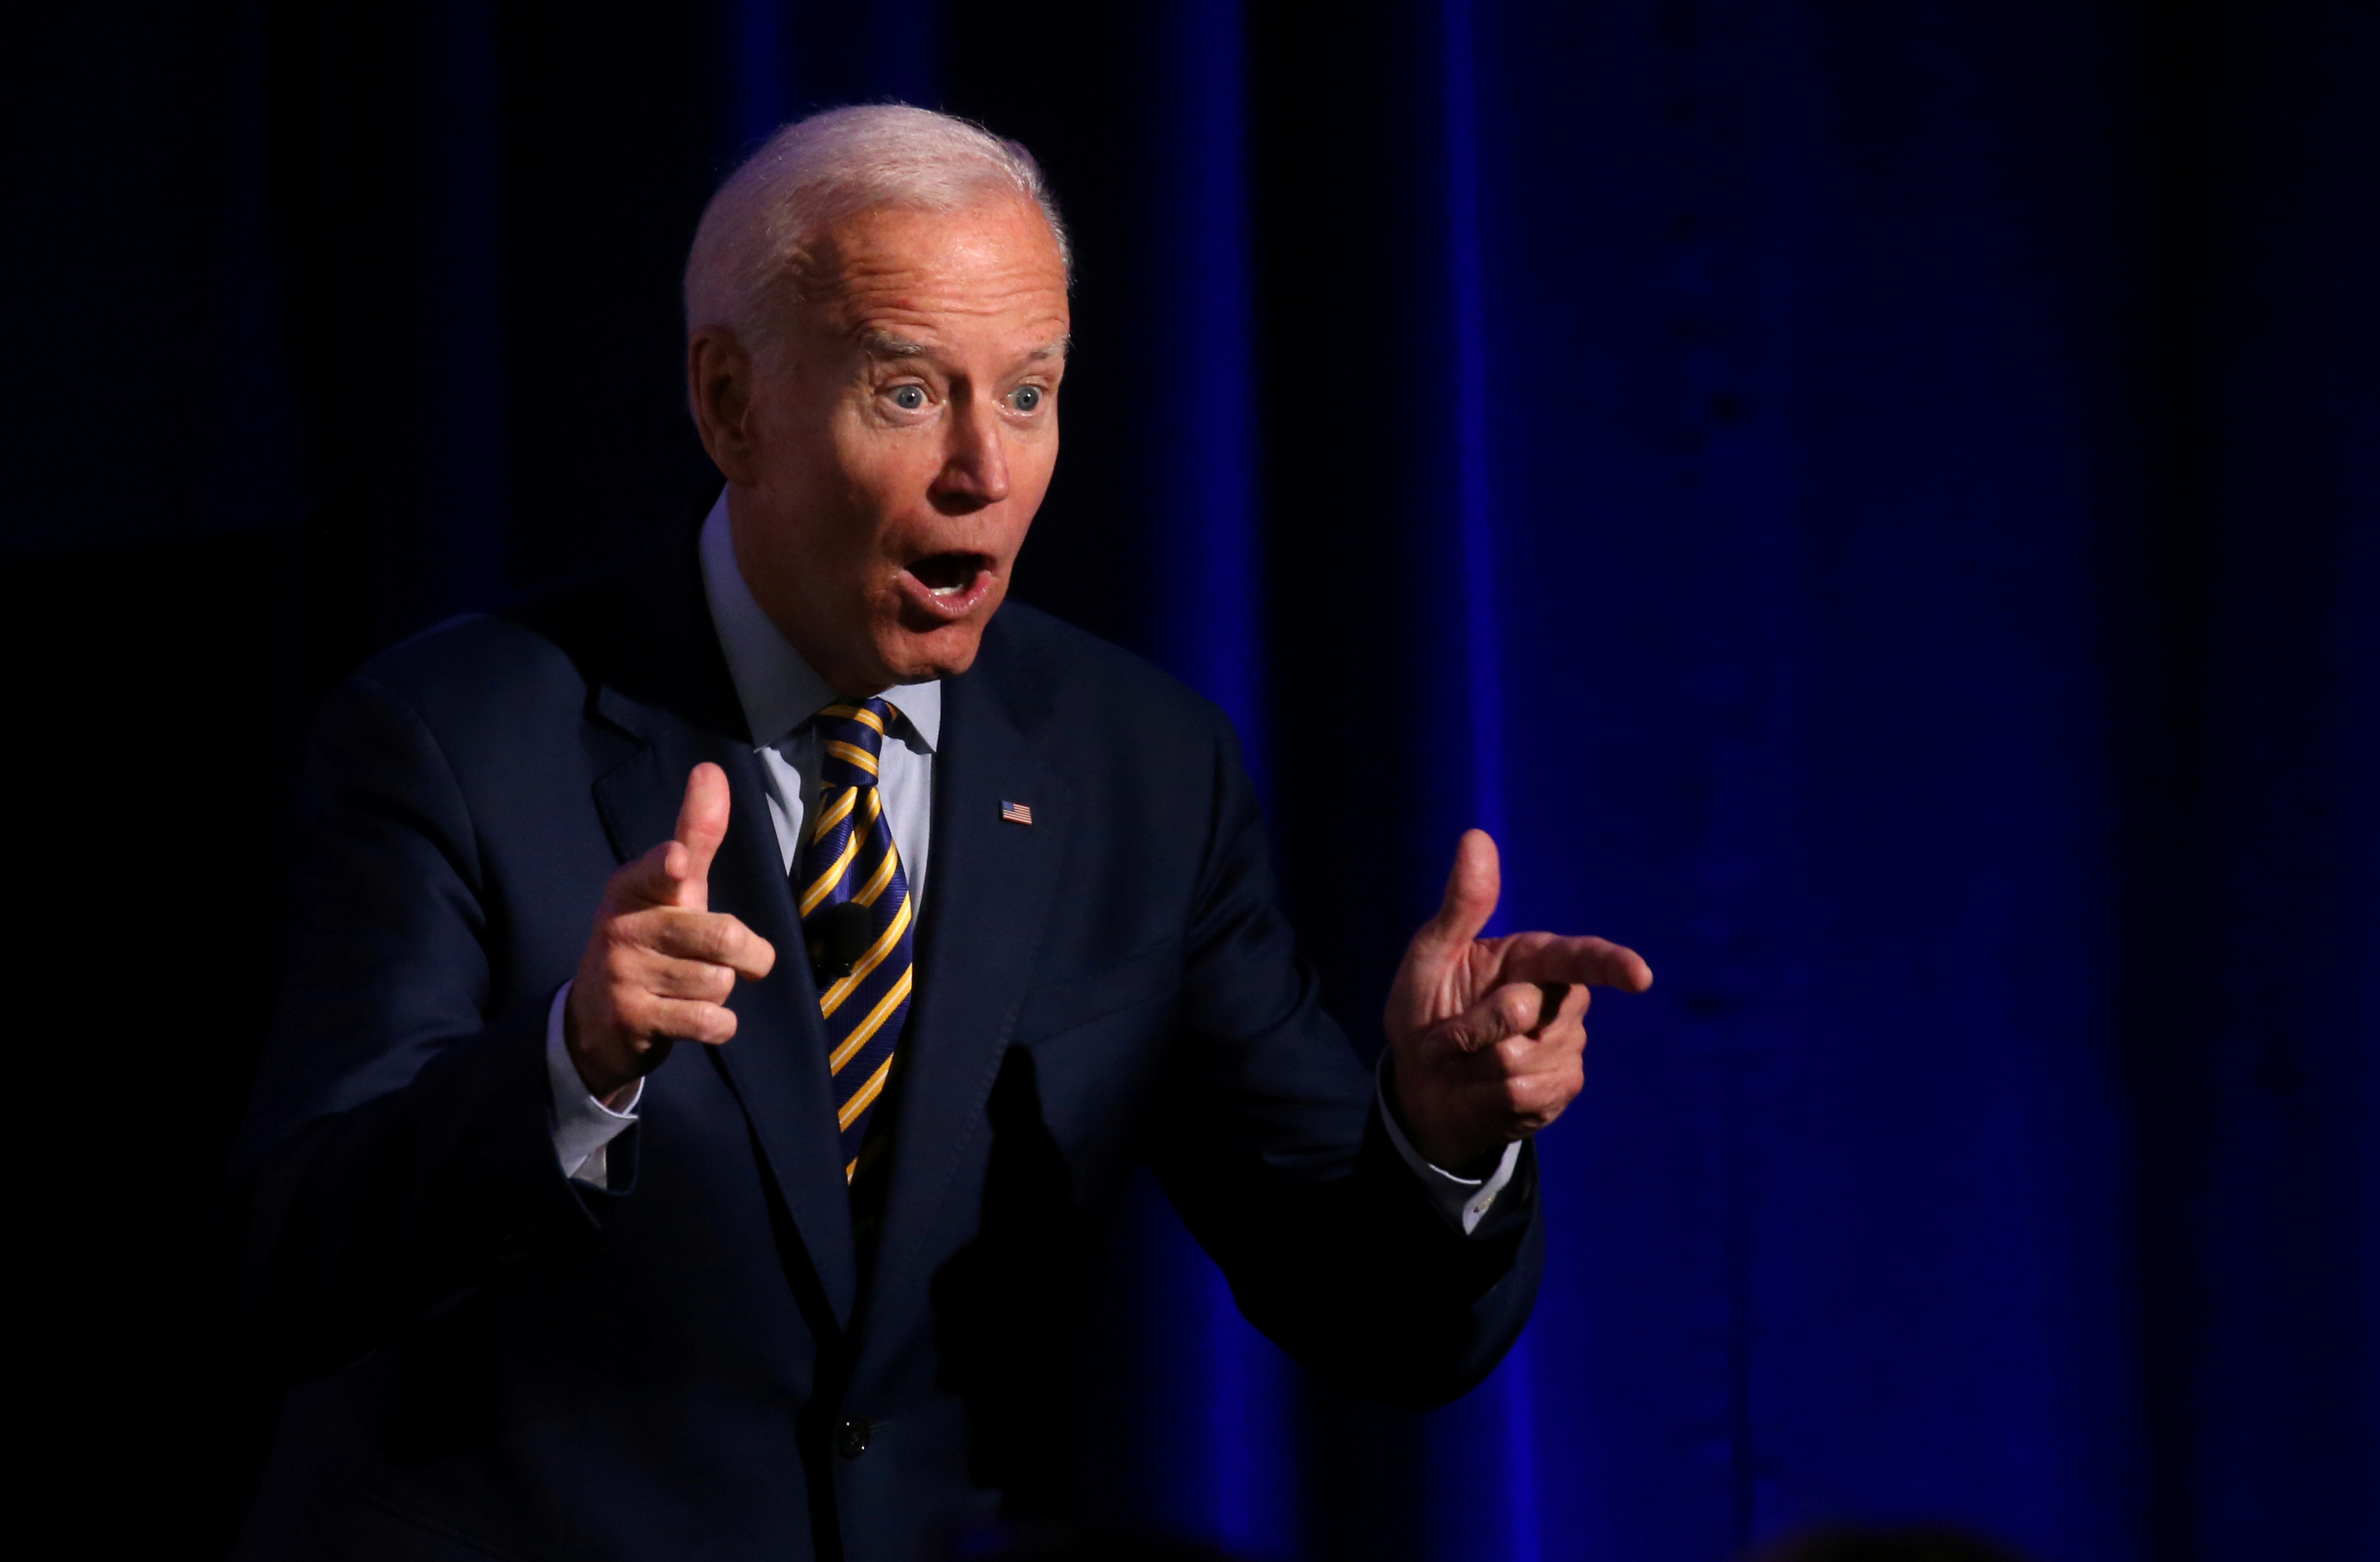 Democratic candidate for president, former Vice President Joe Biden, tells the audience to vote as he leaves the stage after participating in We Decide: 2020 Election Membership Forum, an event put on by Planned Parenthood in the University of South Carolina's Alumni Center in Columbia, South Carolina, U.S., June 22, 2019. REUTERS/Leah Millis 